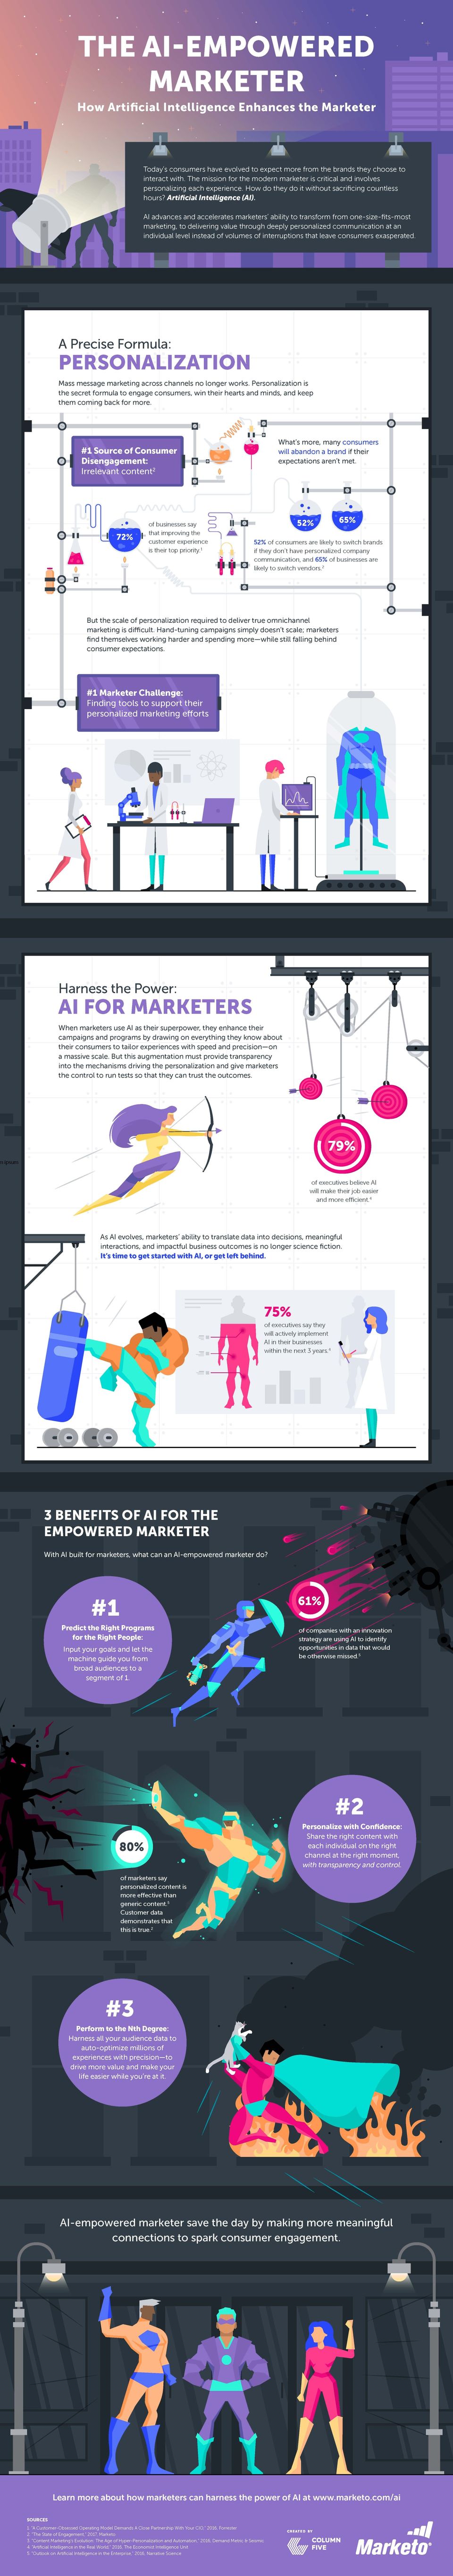 The ai empowered marketer infographic20180427 24880 18whw8o